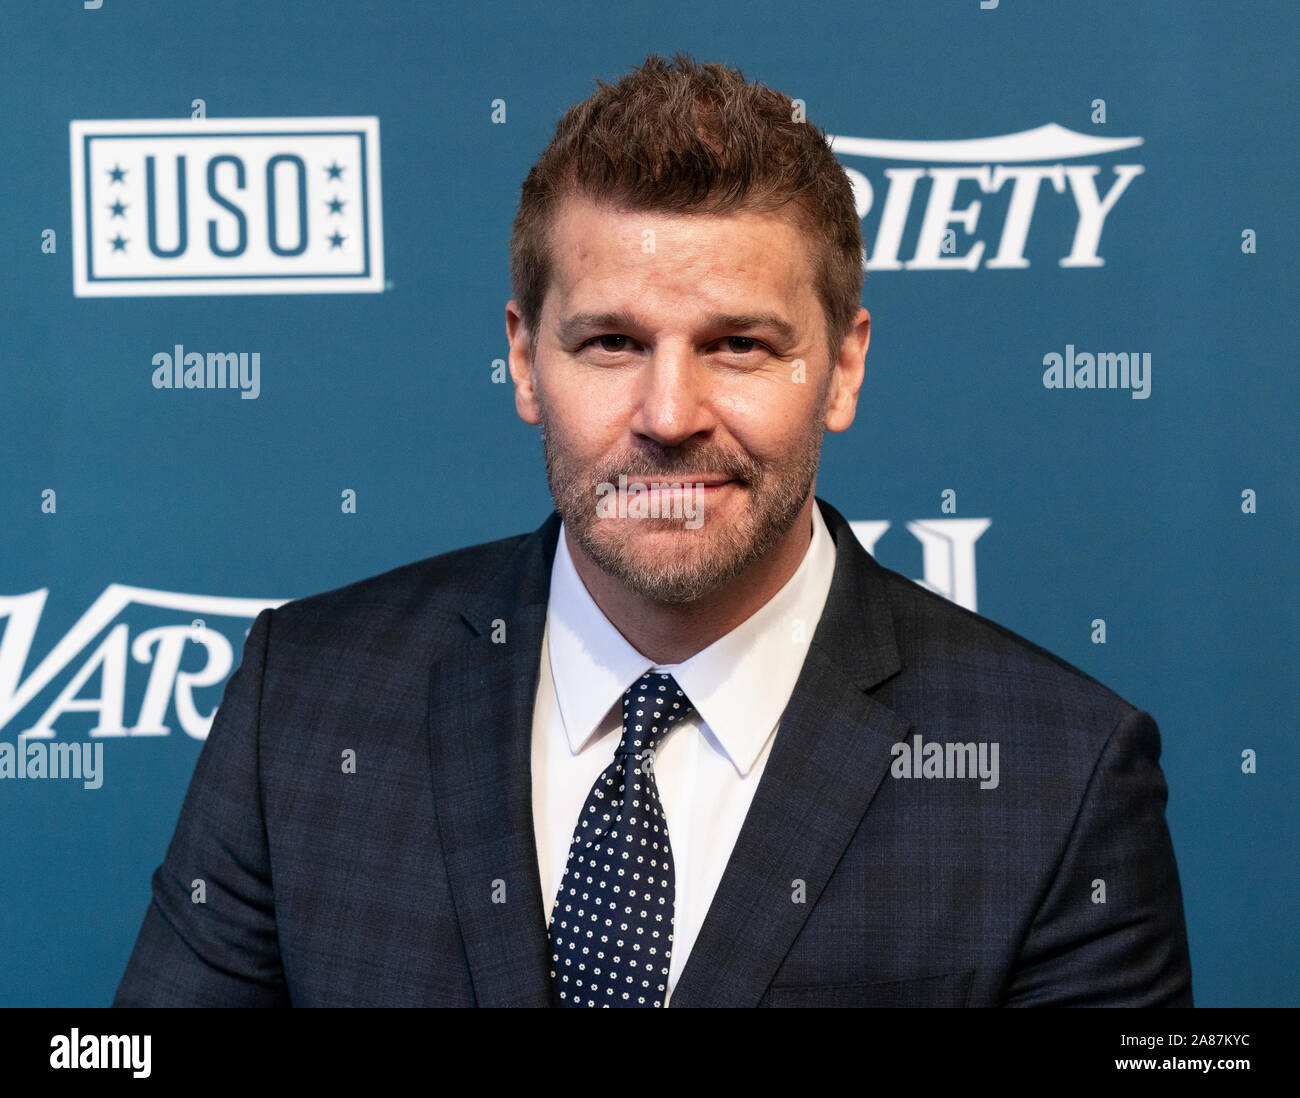 New York, United States. 06th Nov, 2019. David Boreanaz attends Variety's 3rd Annual Salute To Service at Cipriani 25 Broadway (Photo by Lev Radin/Pacific Press) Credit: Pacific Press Agency/Alamy Live News Stock Photo